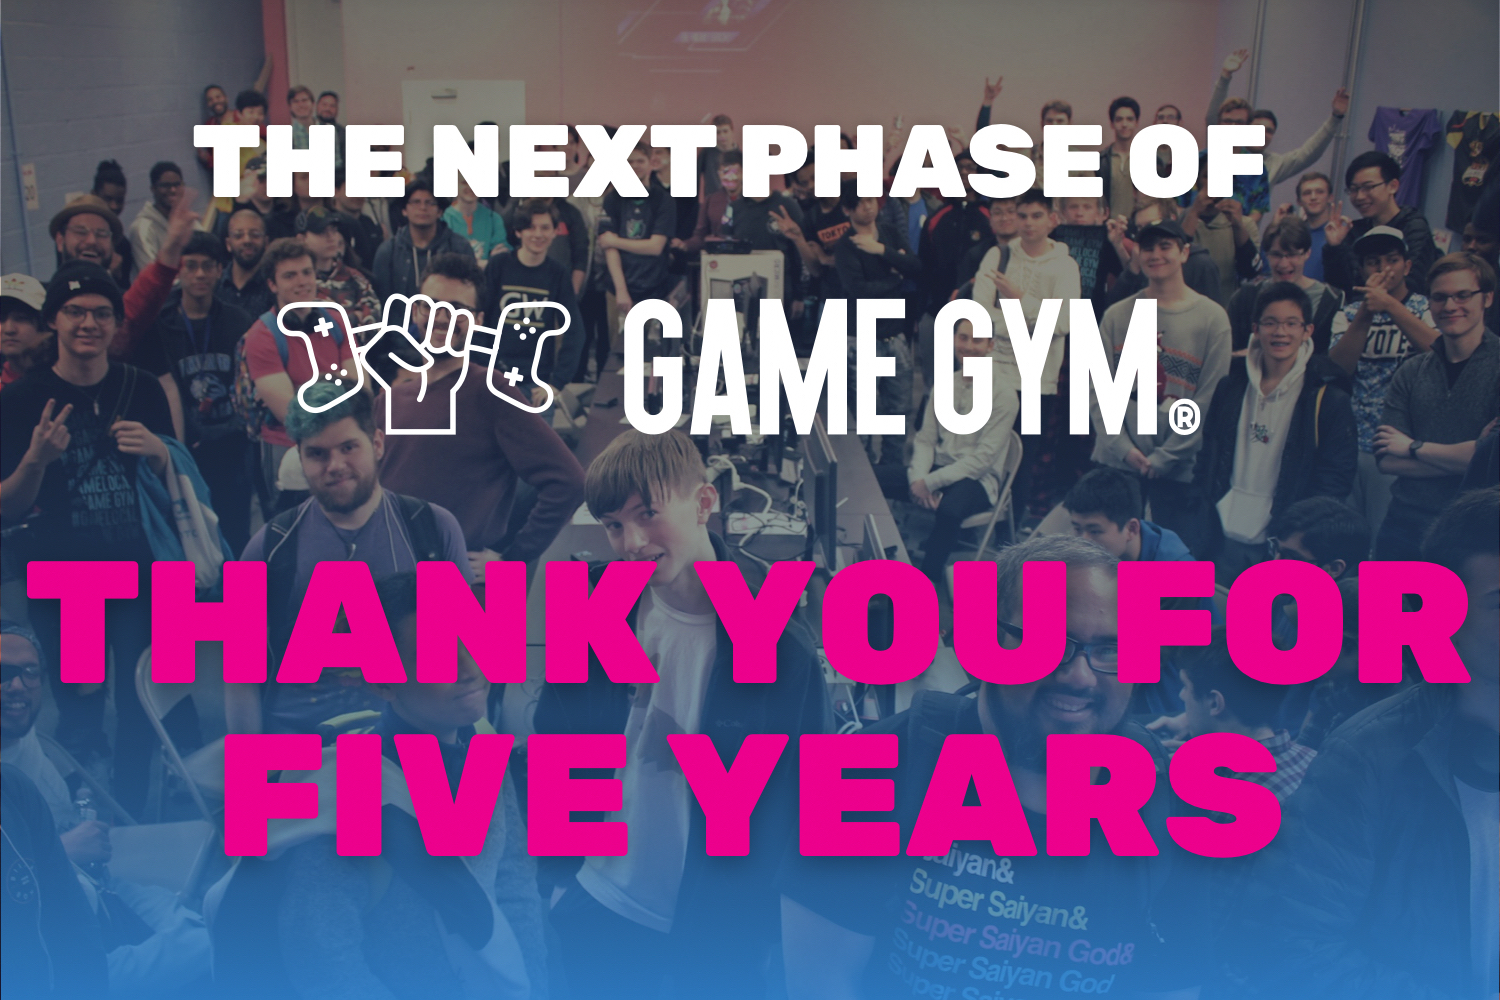 Thank you for five years. Next phase of Game Gym.